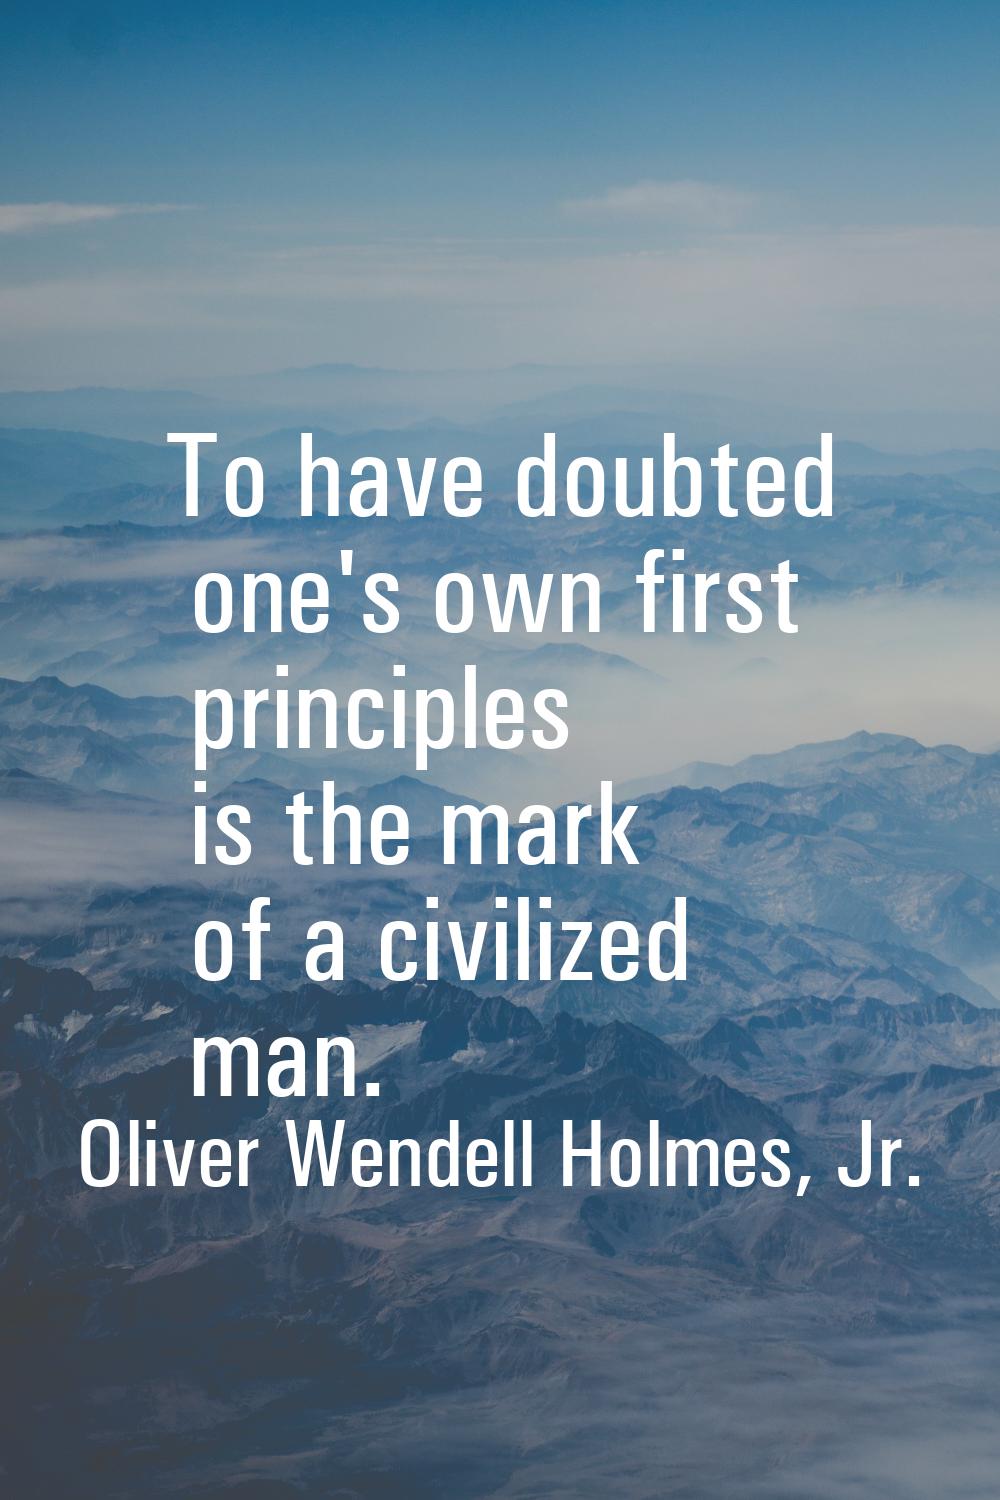 To have doubted one's own first principles is the mark of a civilized man.